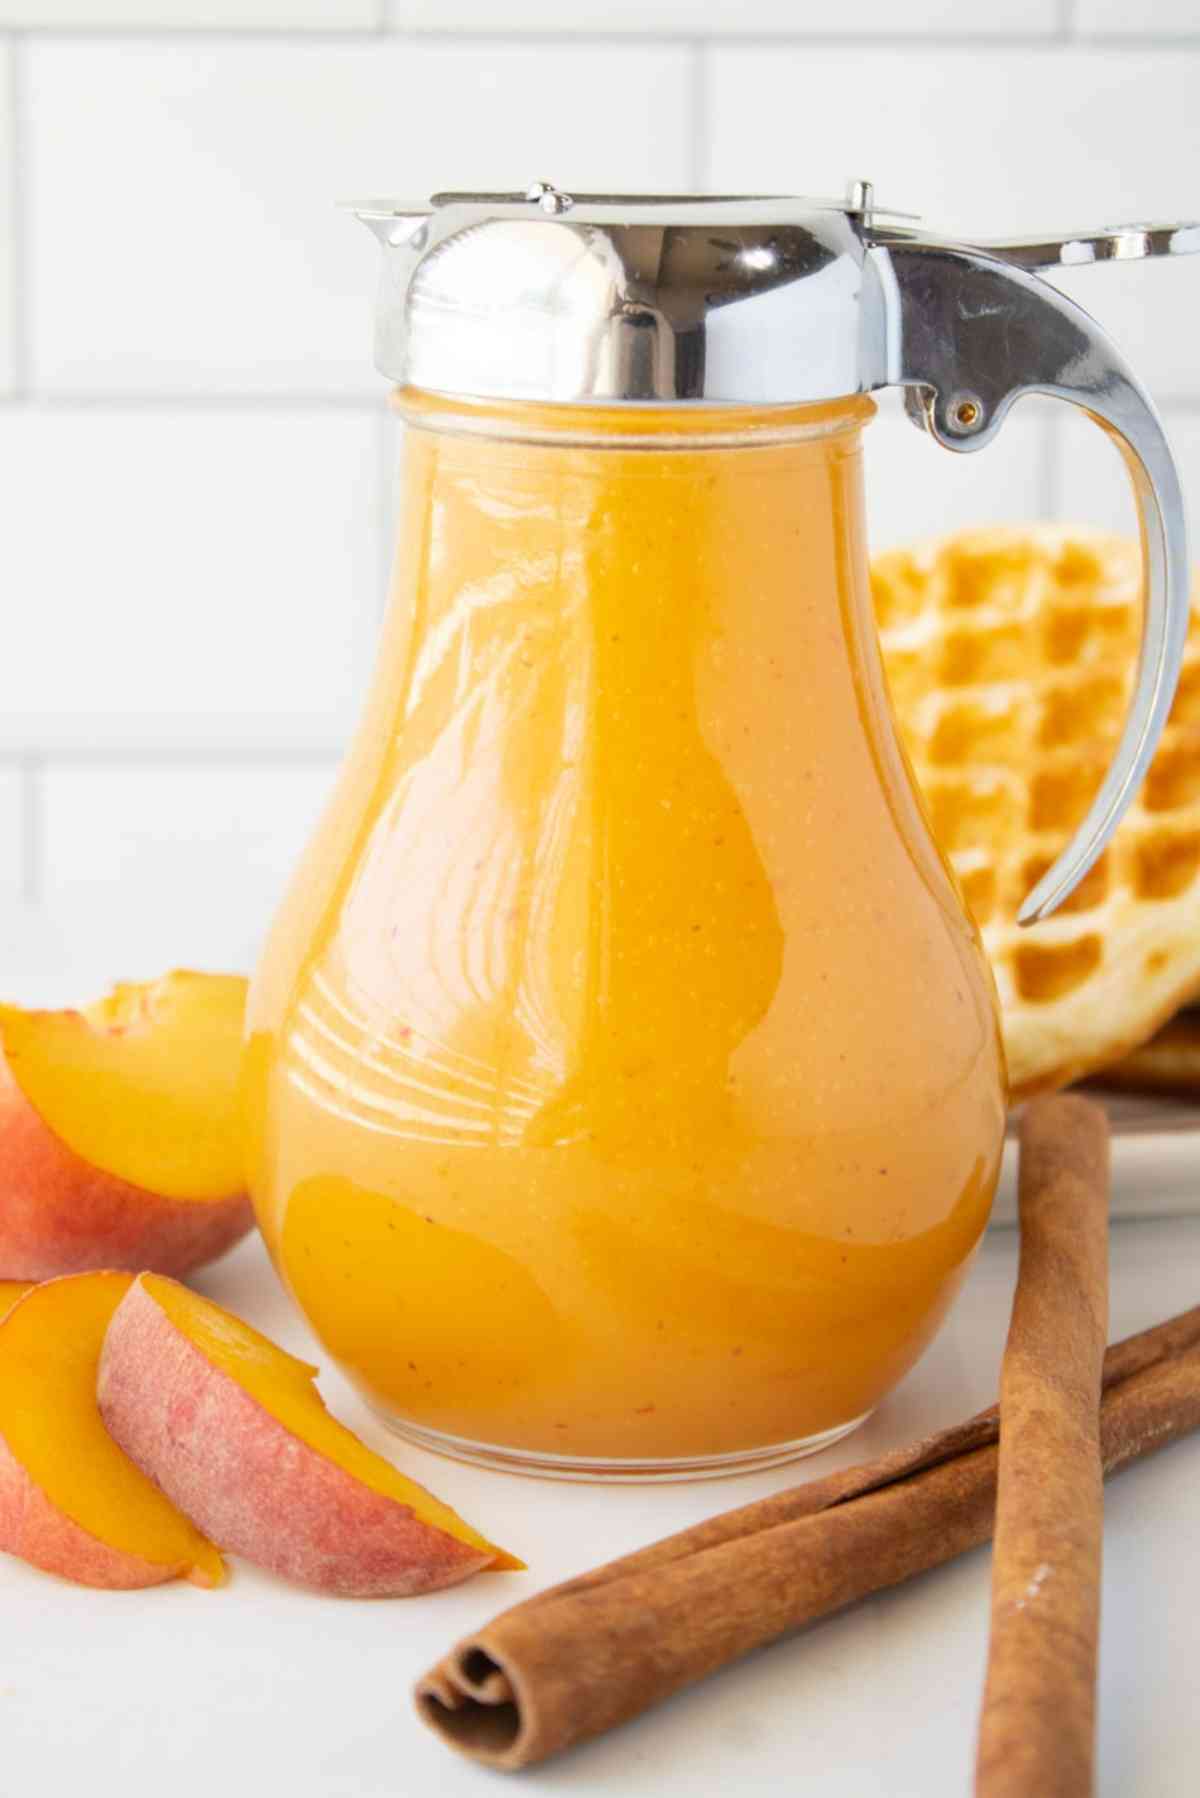 Bottle of fresh peach syrup by some waffles.